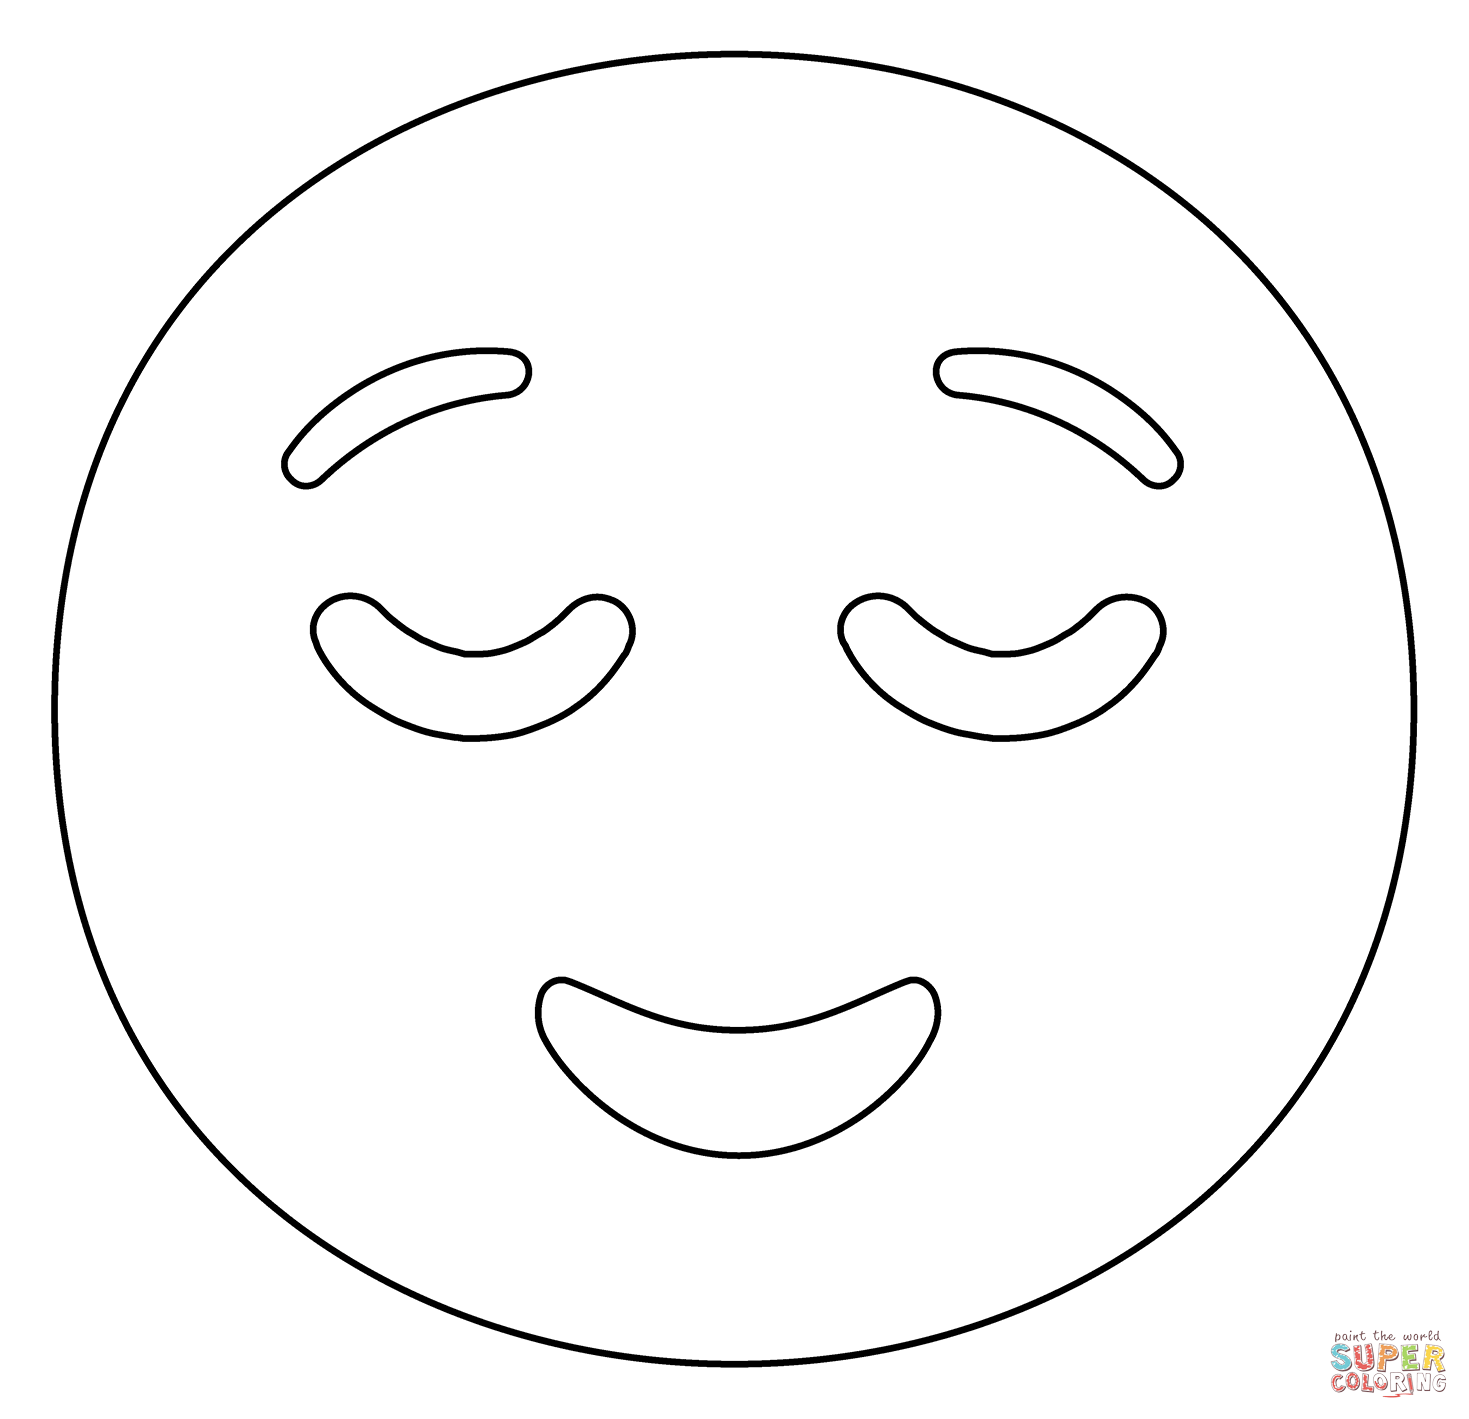 Relieved face emoji coloring page free printable coloring pages